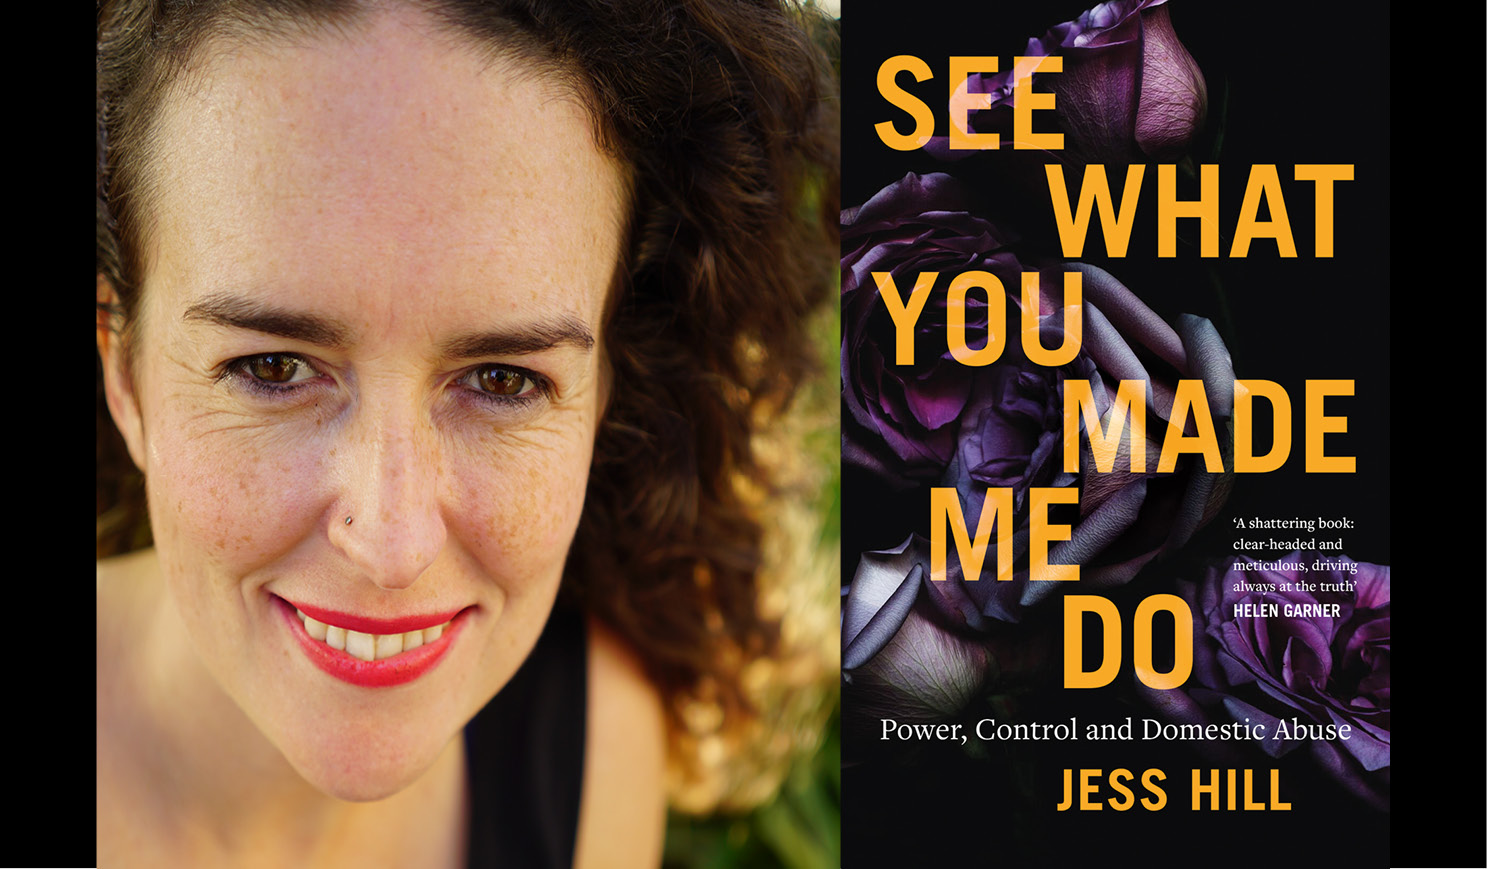 Jess Hill's headshot alongside the cover of her book See what you made me do